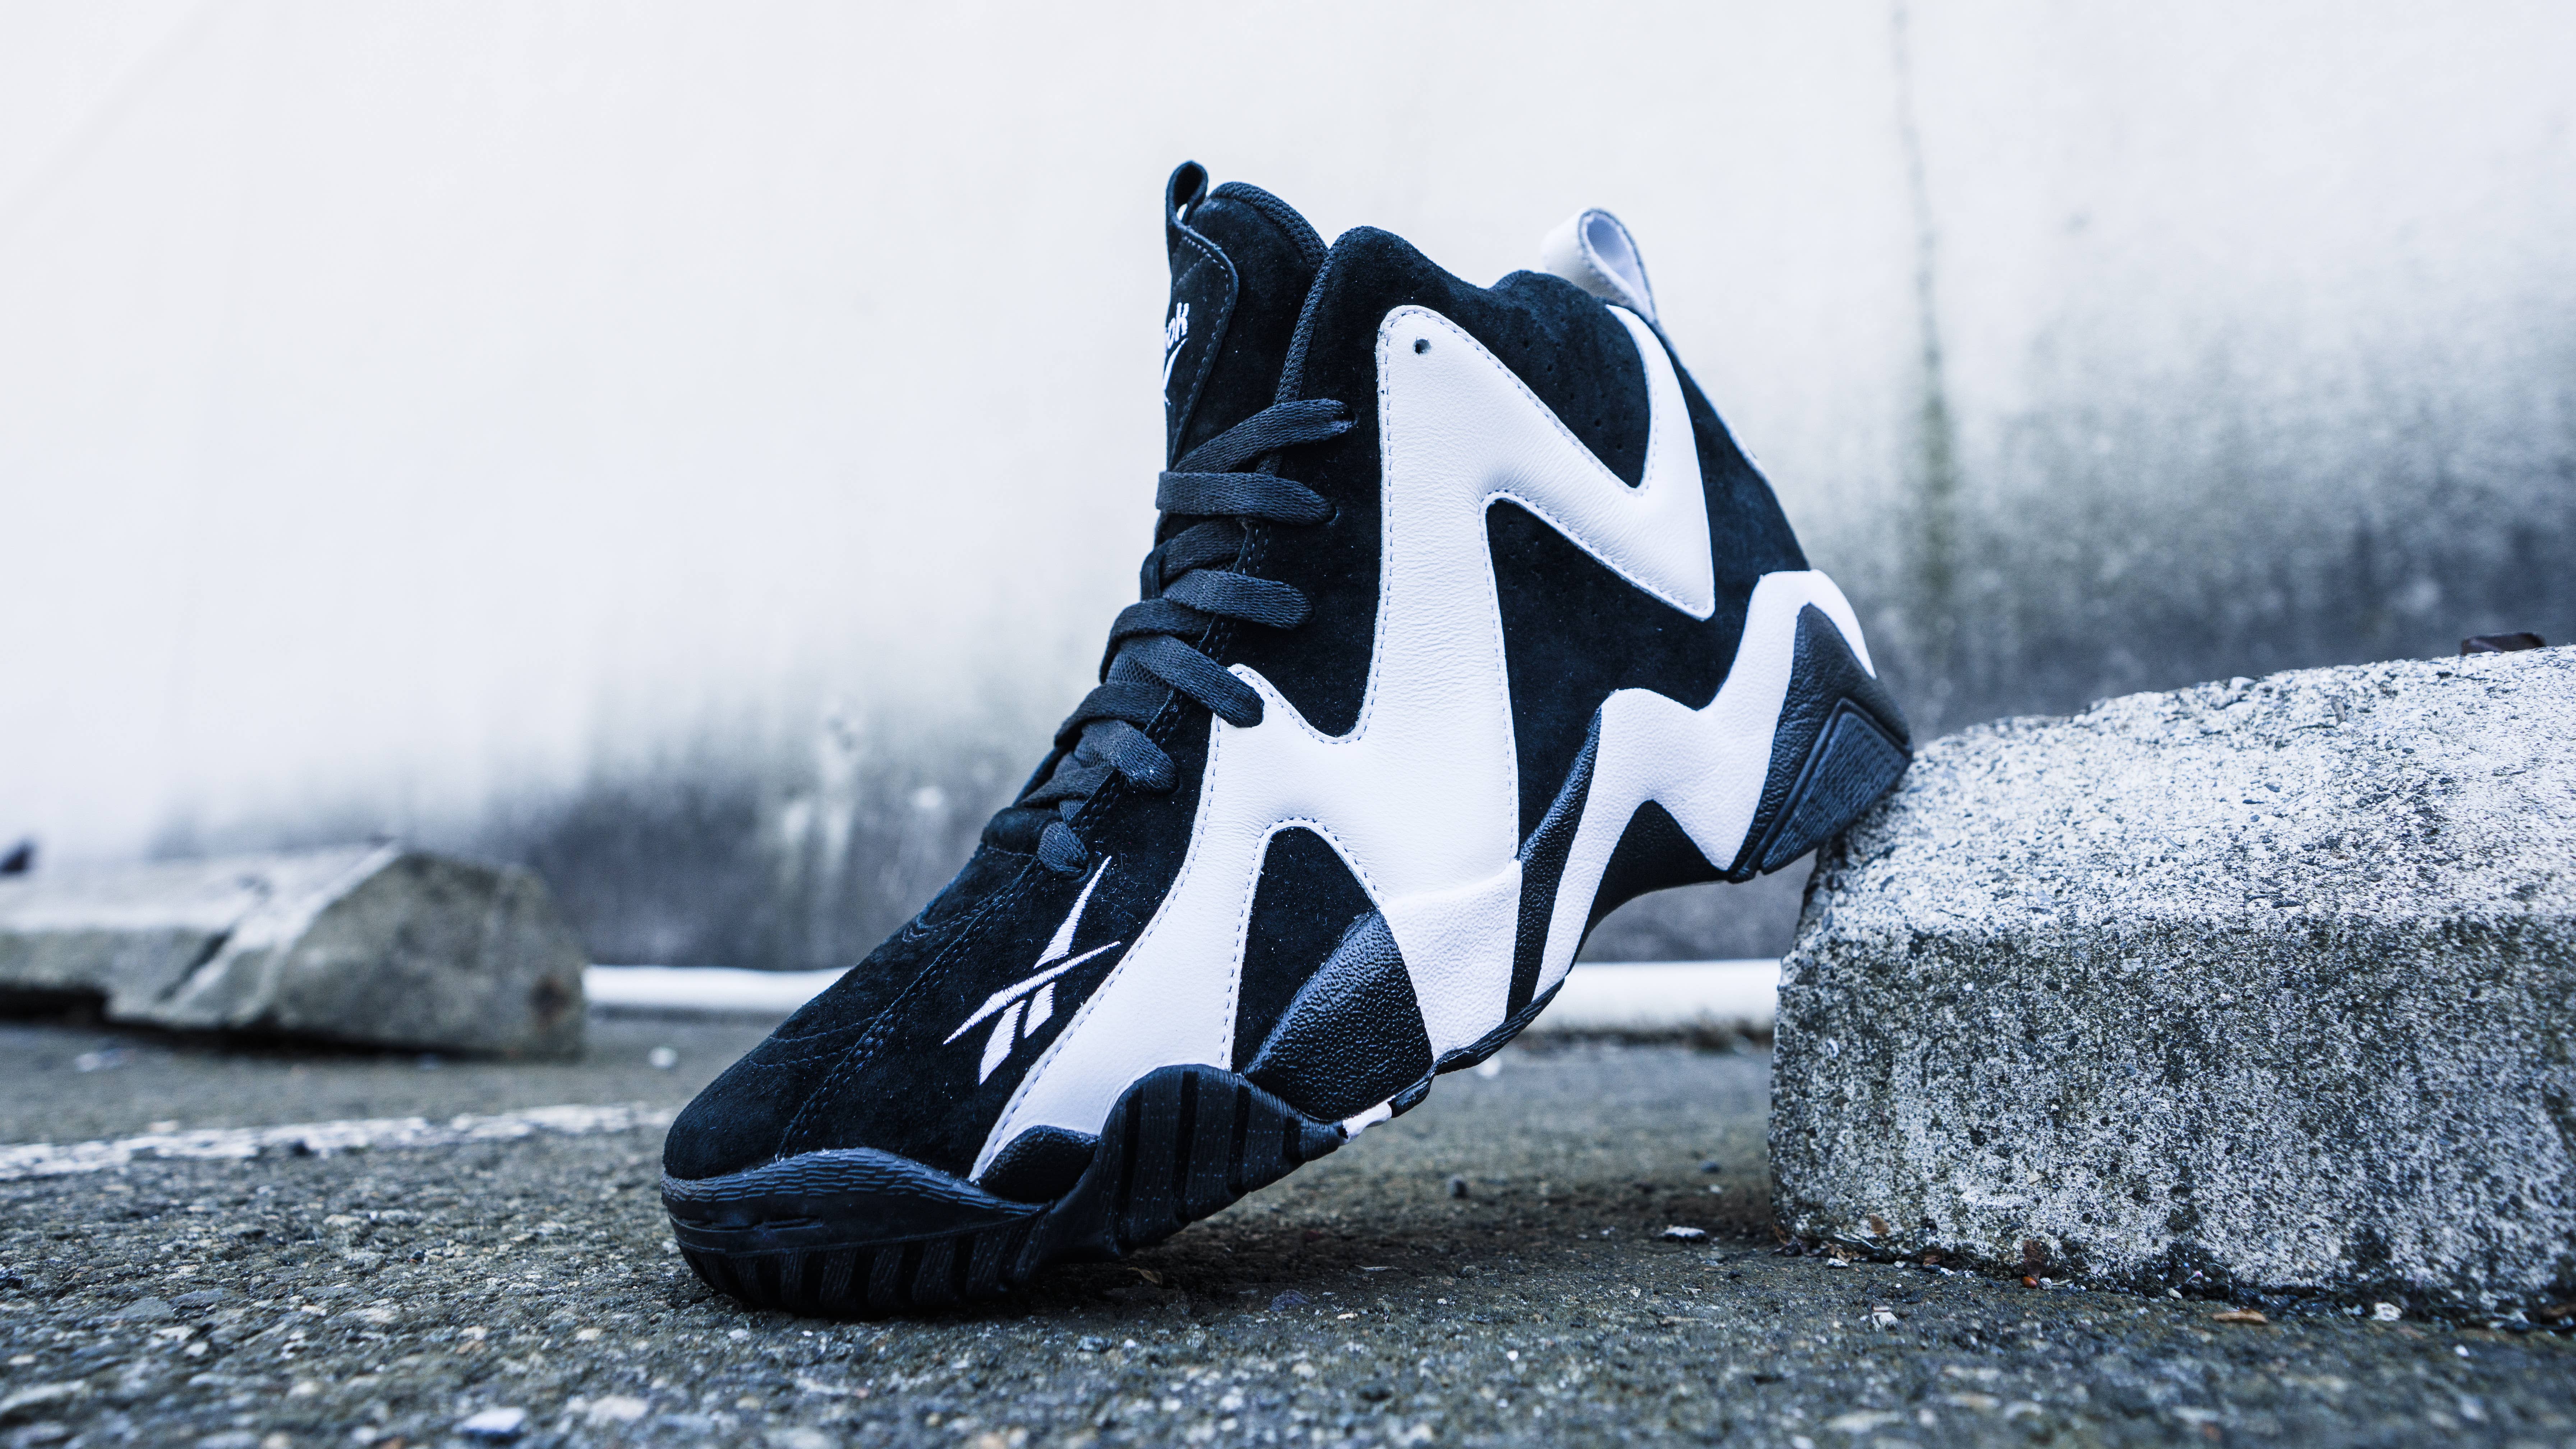 Reebok Renames Kamikaze Sneaker in Order to Be 'Accountable' | Complex